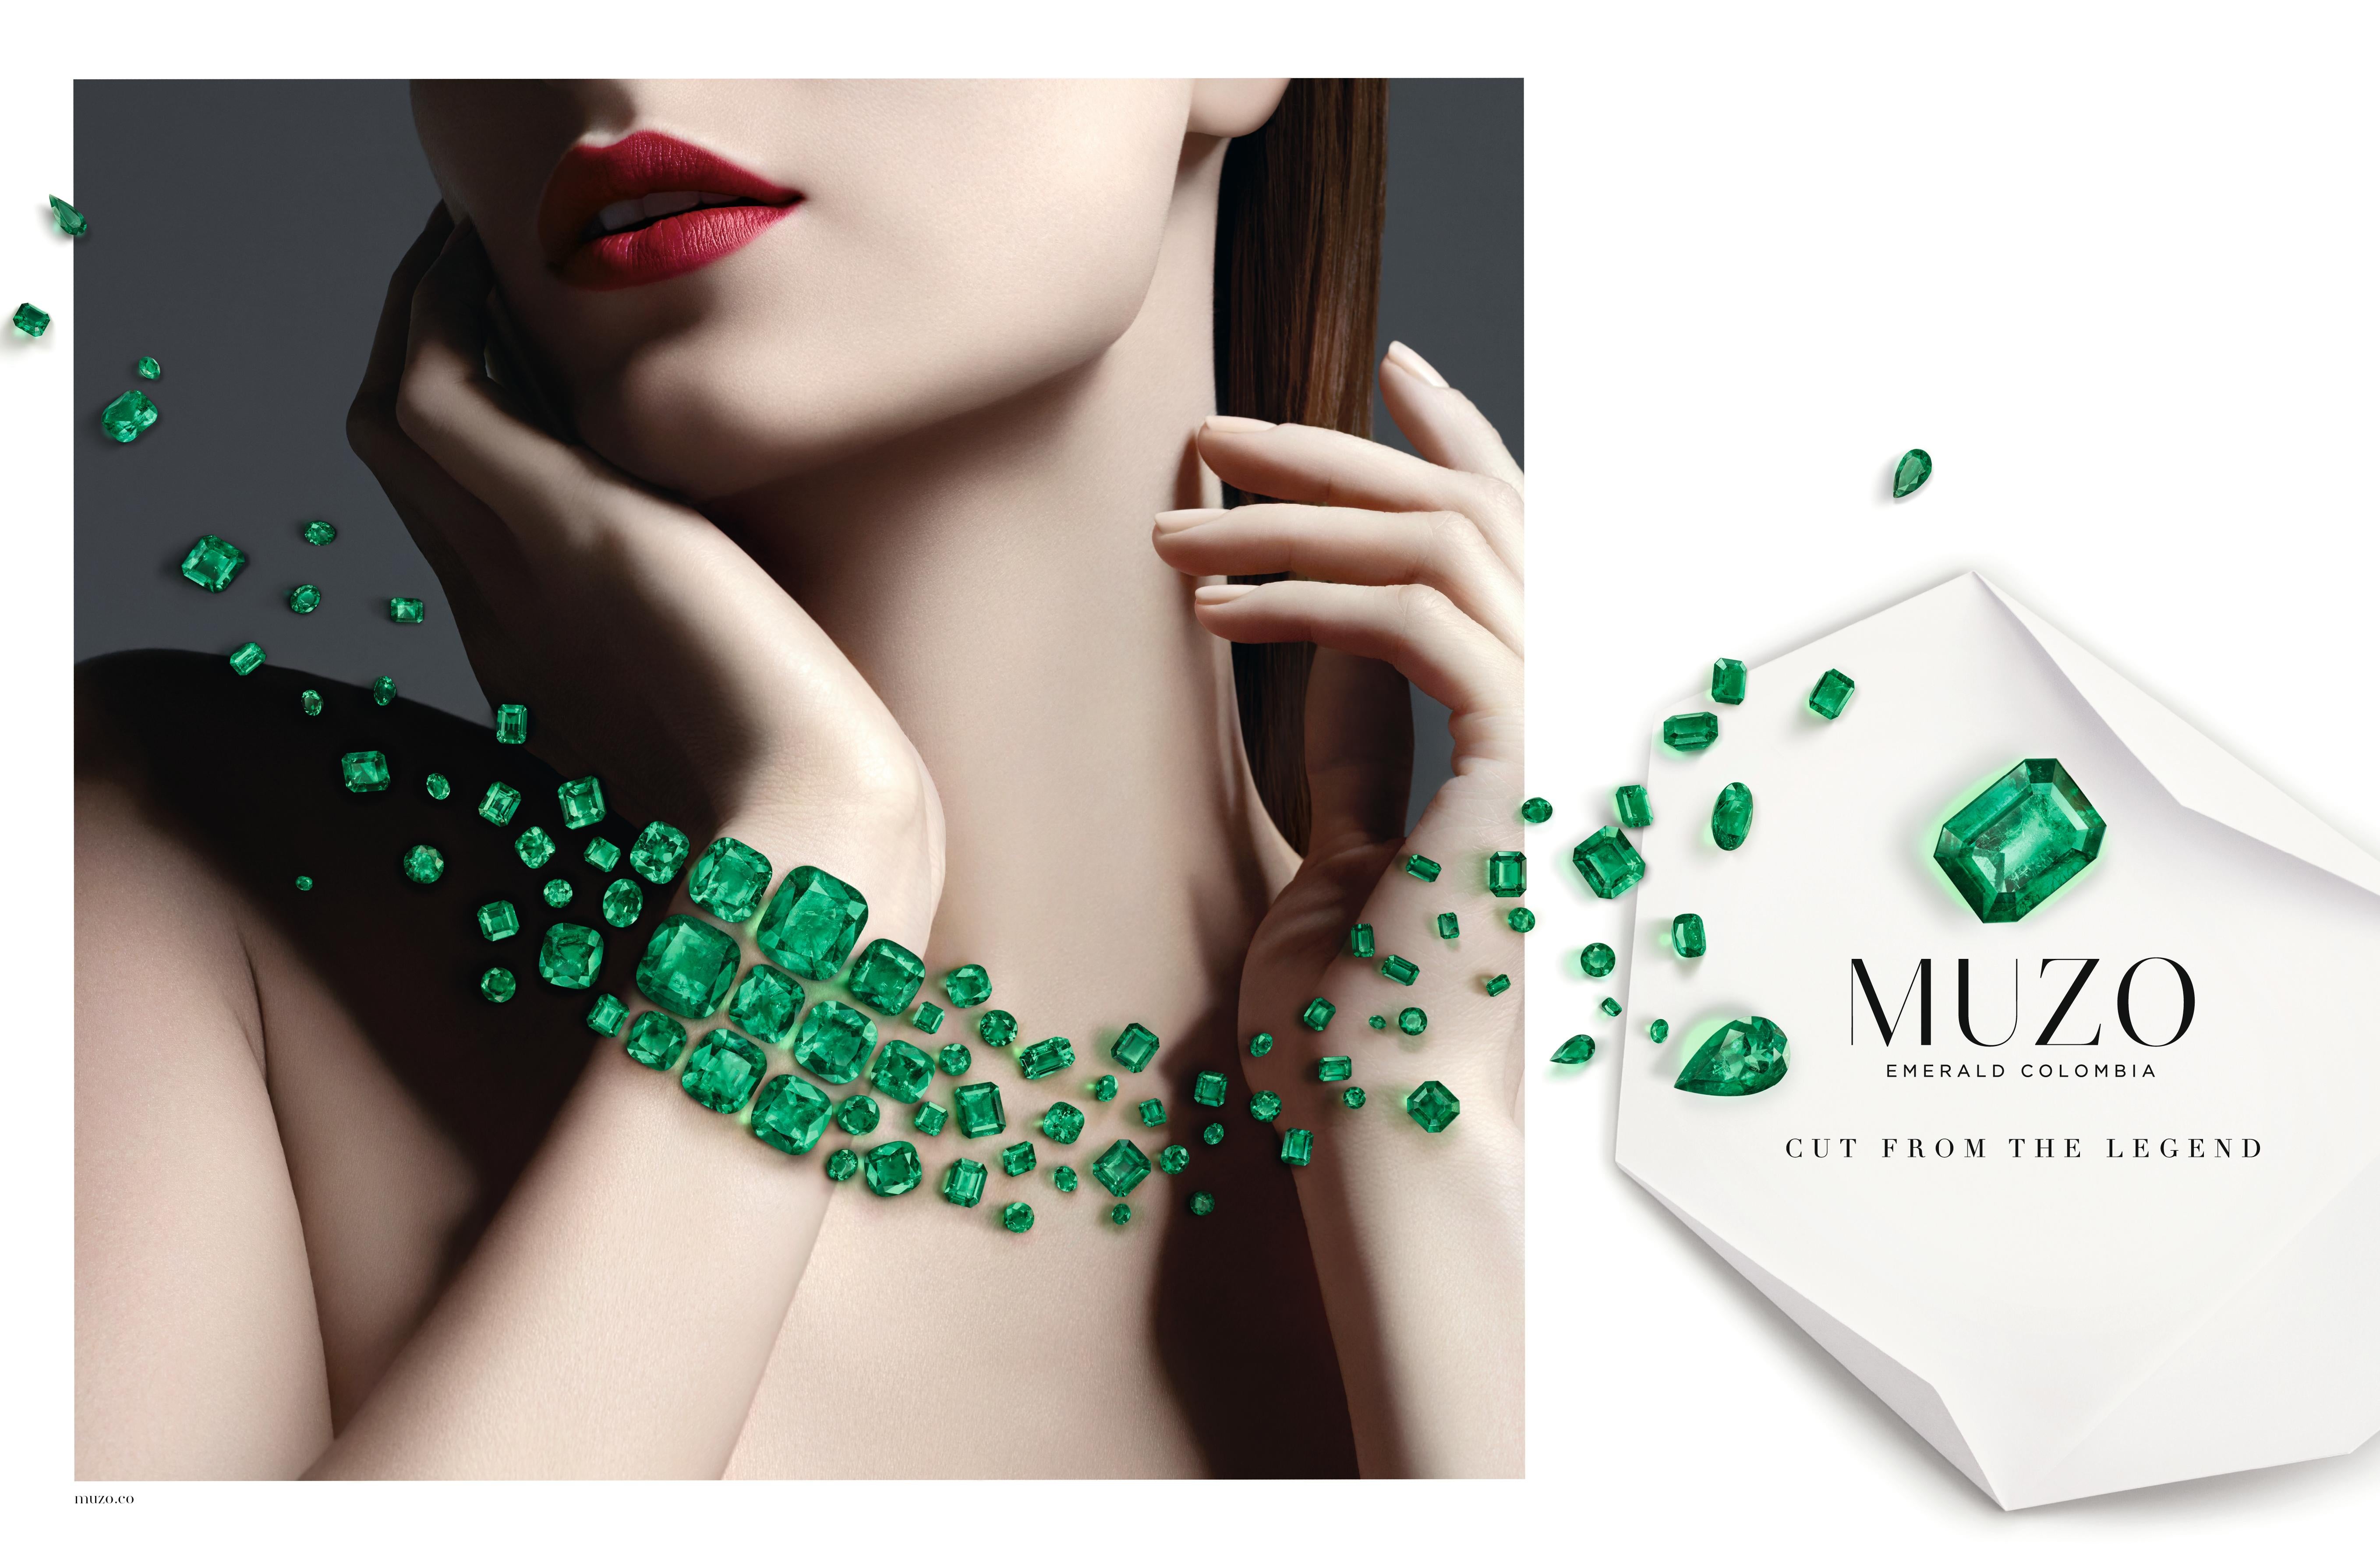 Muzo Emerald Colombia Heritage Atocha Earrings set with 20.45 carats Emerald

Atocha is inspired by a collection of jeweled treasures destined for the Royal family, who ruled the Spanish Empire in the 17th century.  The galleons of the Nuestra